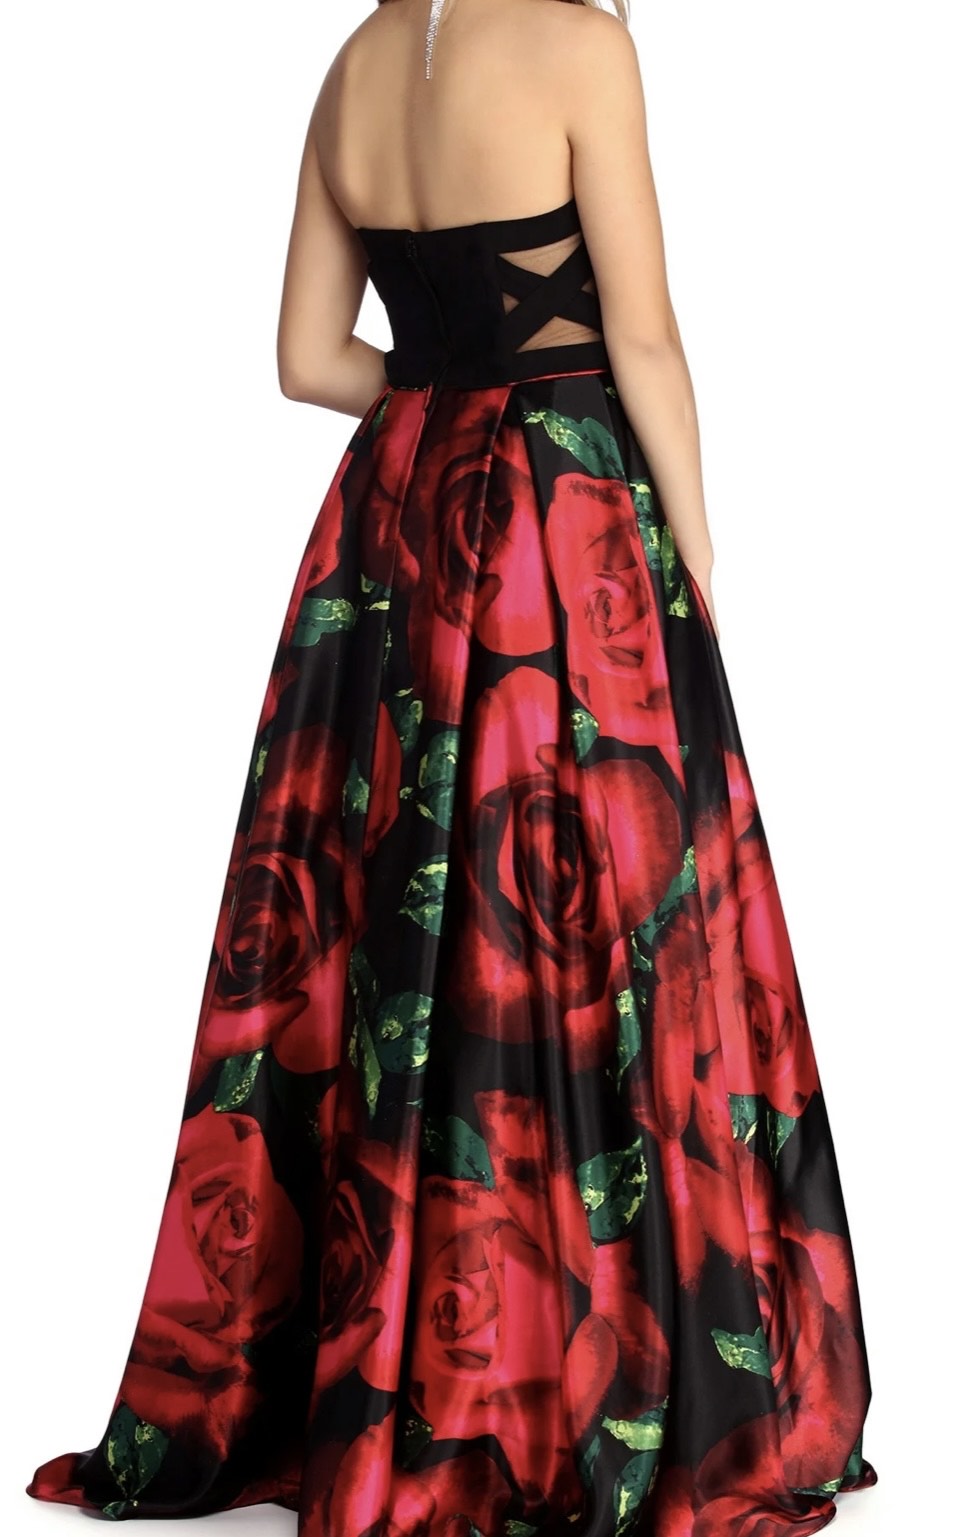 NWT Black Top Rose Bottom Gown As Seen on Hallmark - Size 12